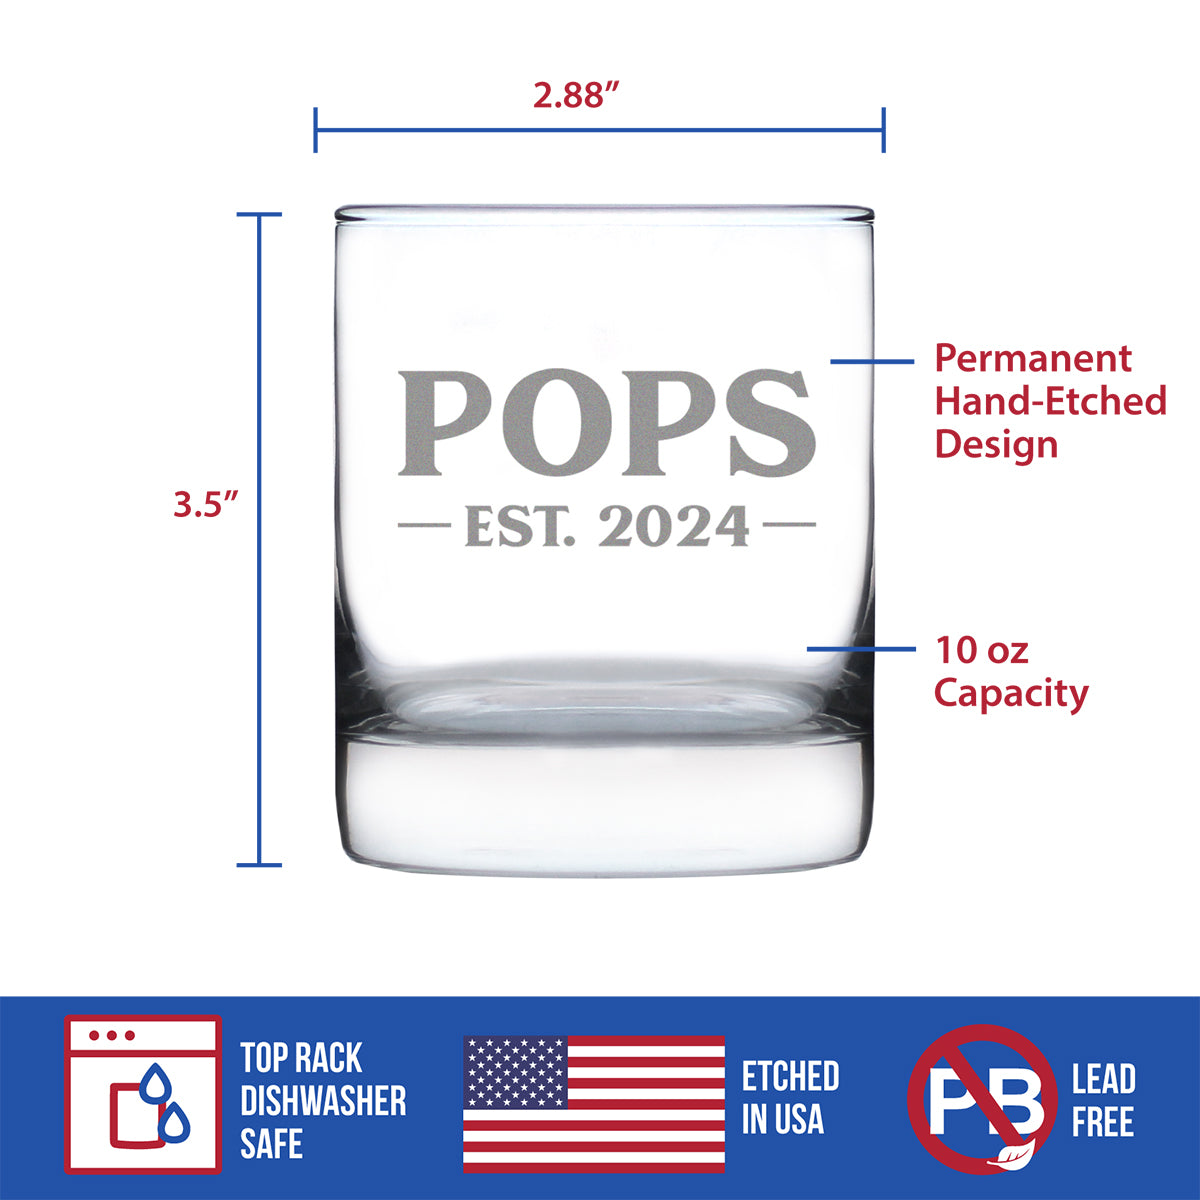 Pops Est. 2024 - Bold - 10 oz Rocks Glass or Old Fashioned Glass, Etched Sayings, Cute and Fun Reveal Gift for Grandparents